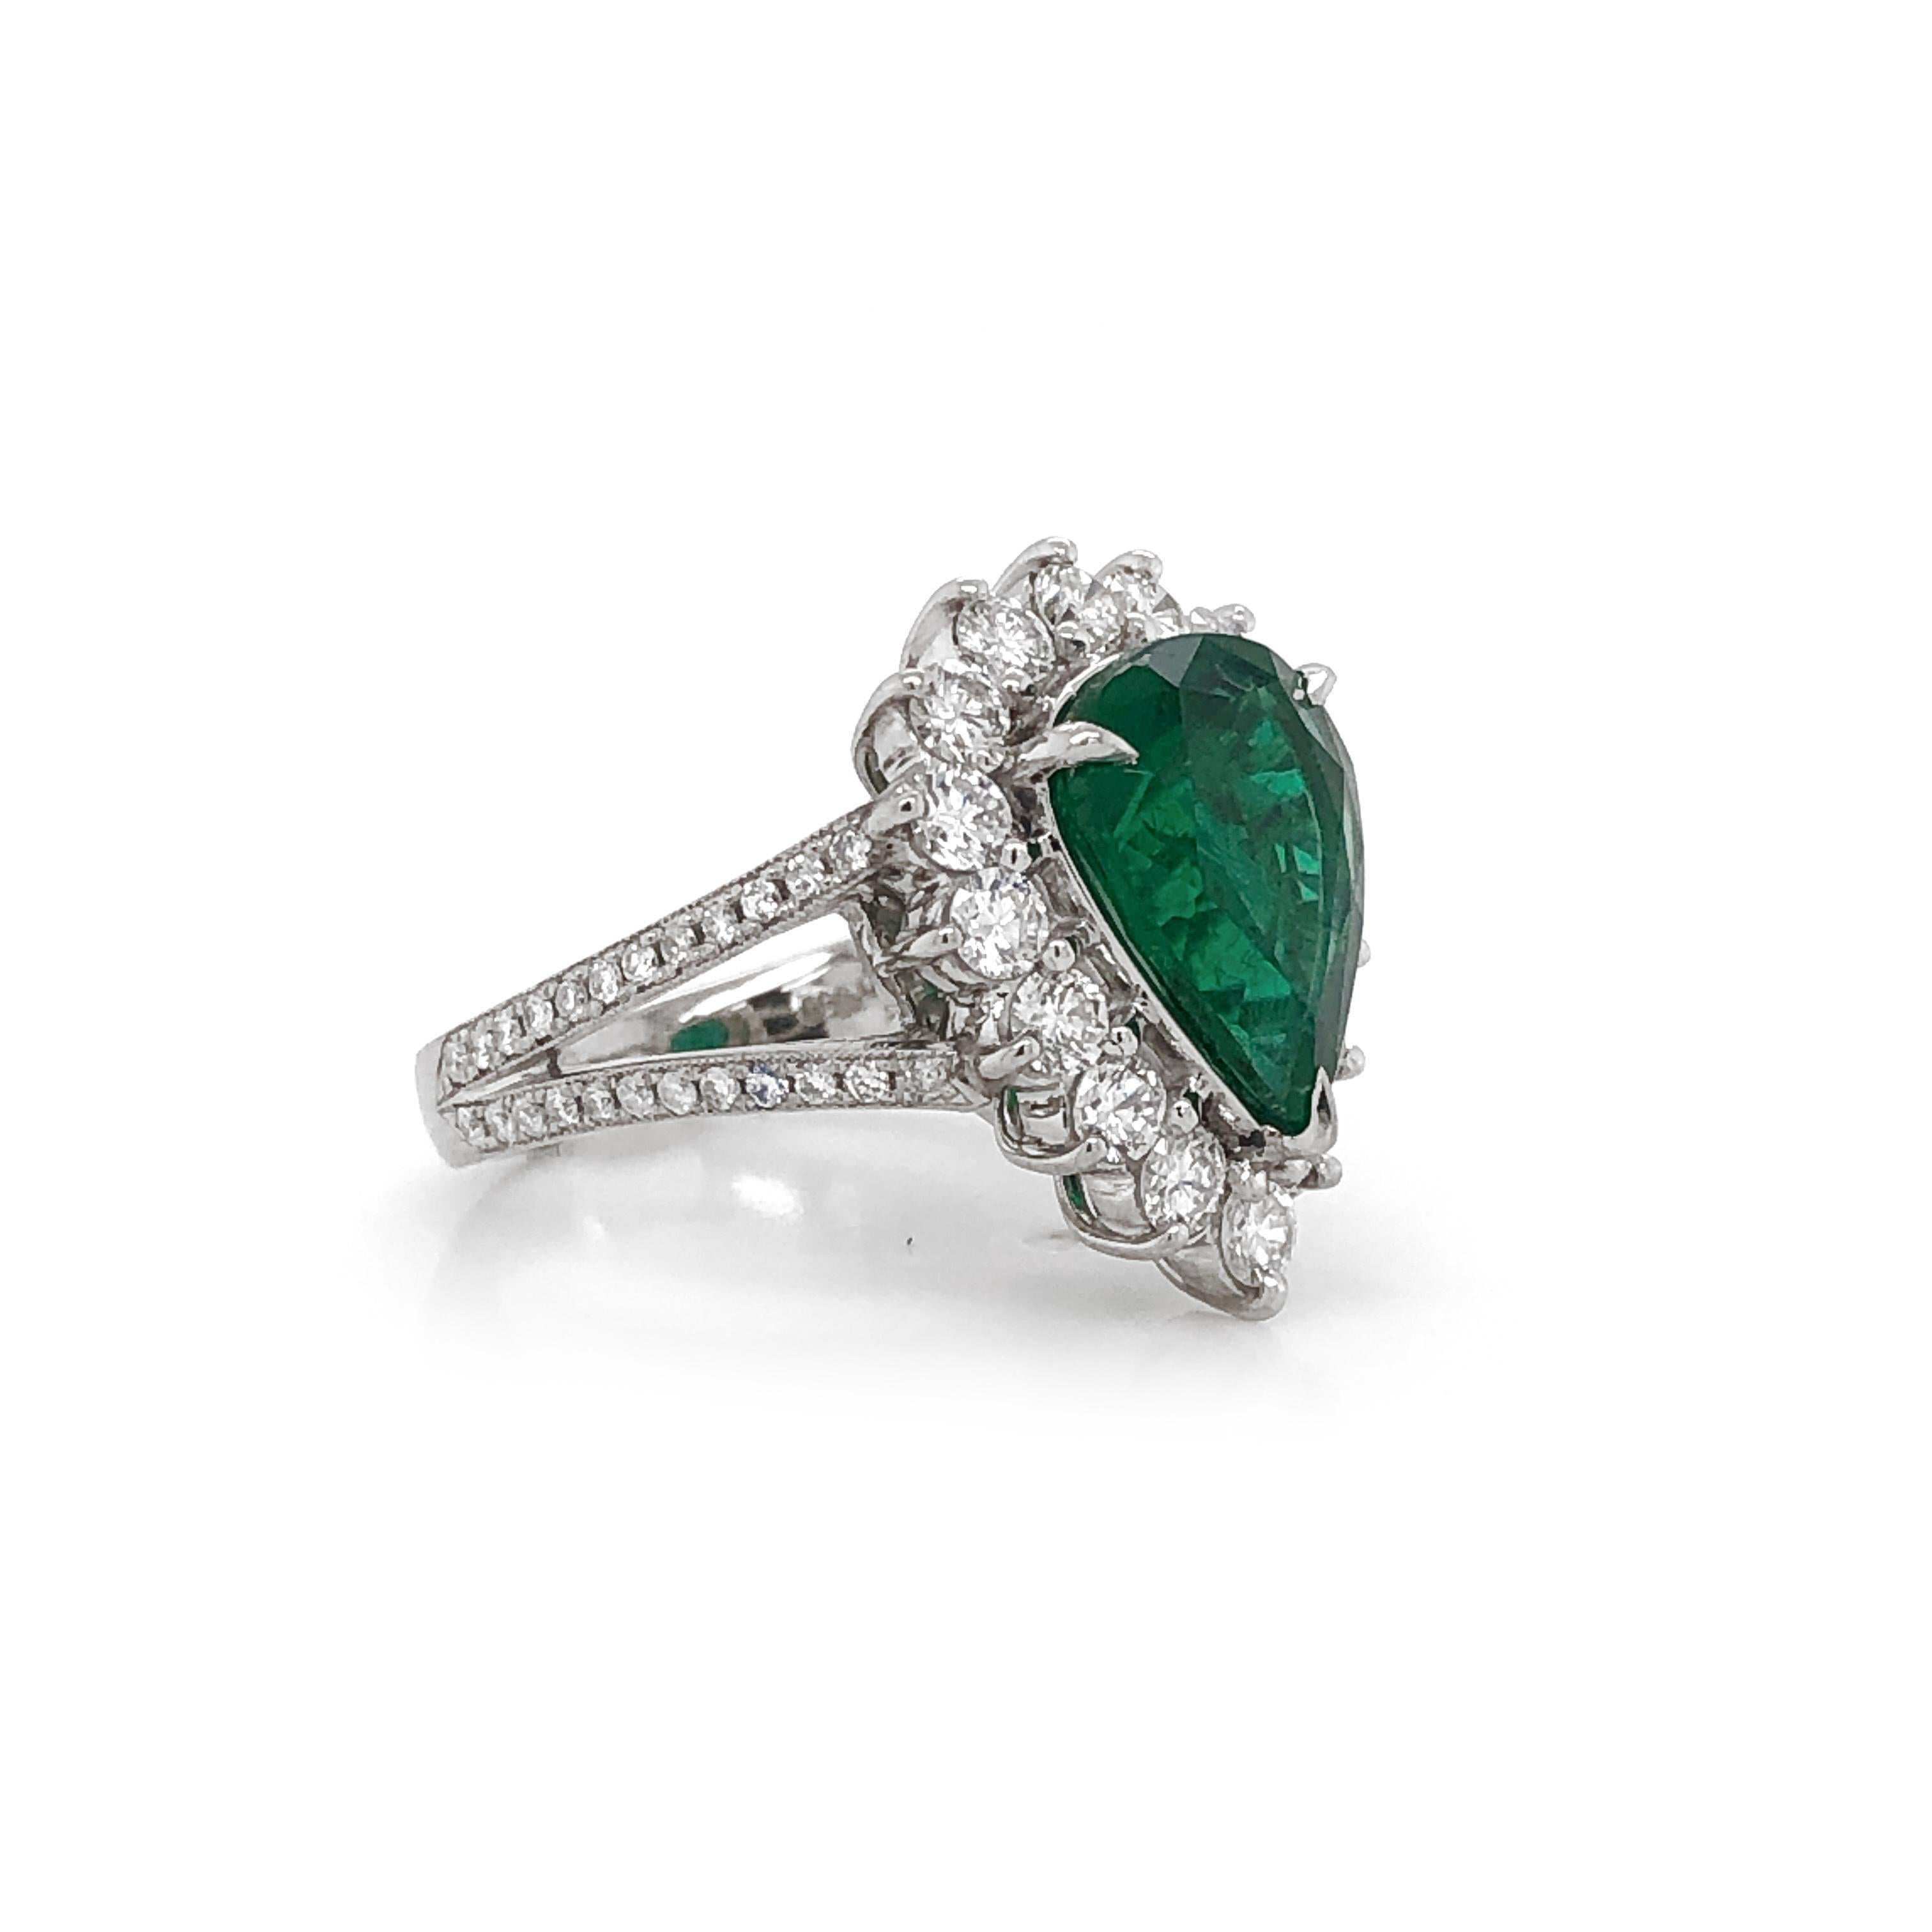 Elegantly styled pear cut green Zambian emerald 3.66 carat center stone - Certified.
Accented by round diamonds 1.36 in total. 
Diamonds are white and natural and in G-H Color Clarity VS.
Platinum 950 metal. 
Beautiful cocktail and engagement ring